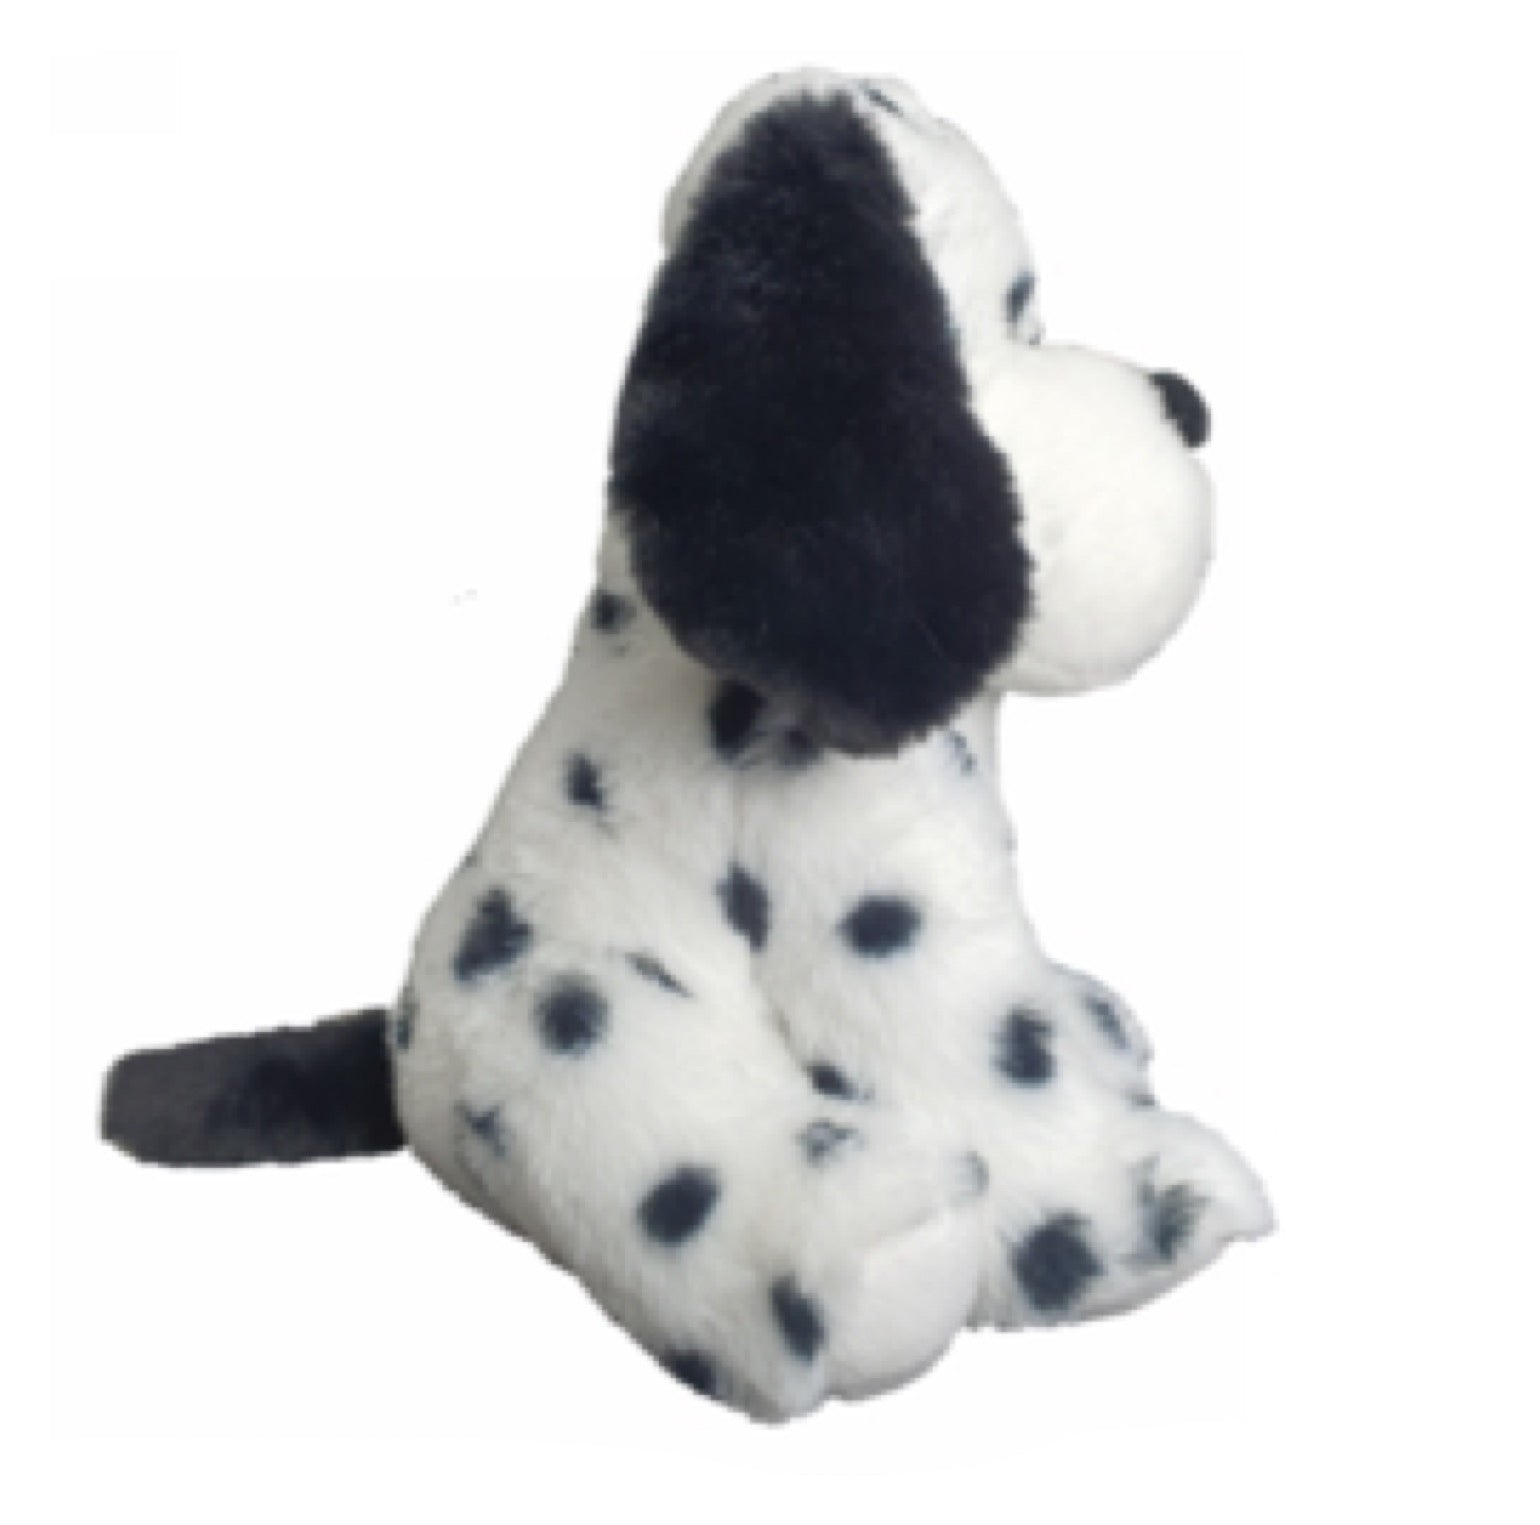 Door Stop Stopper Spotty Dog - The Renmy Store Homewares & Gifts 